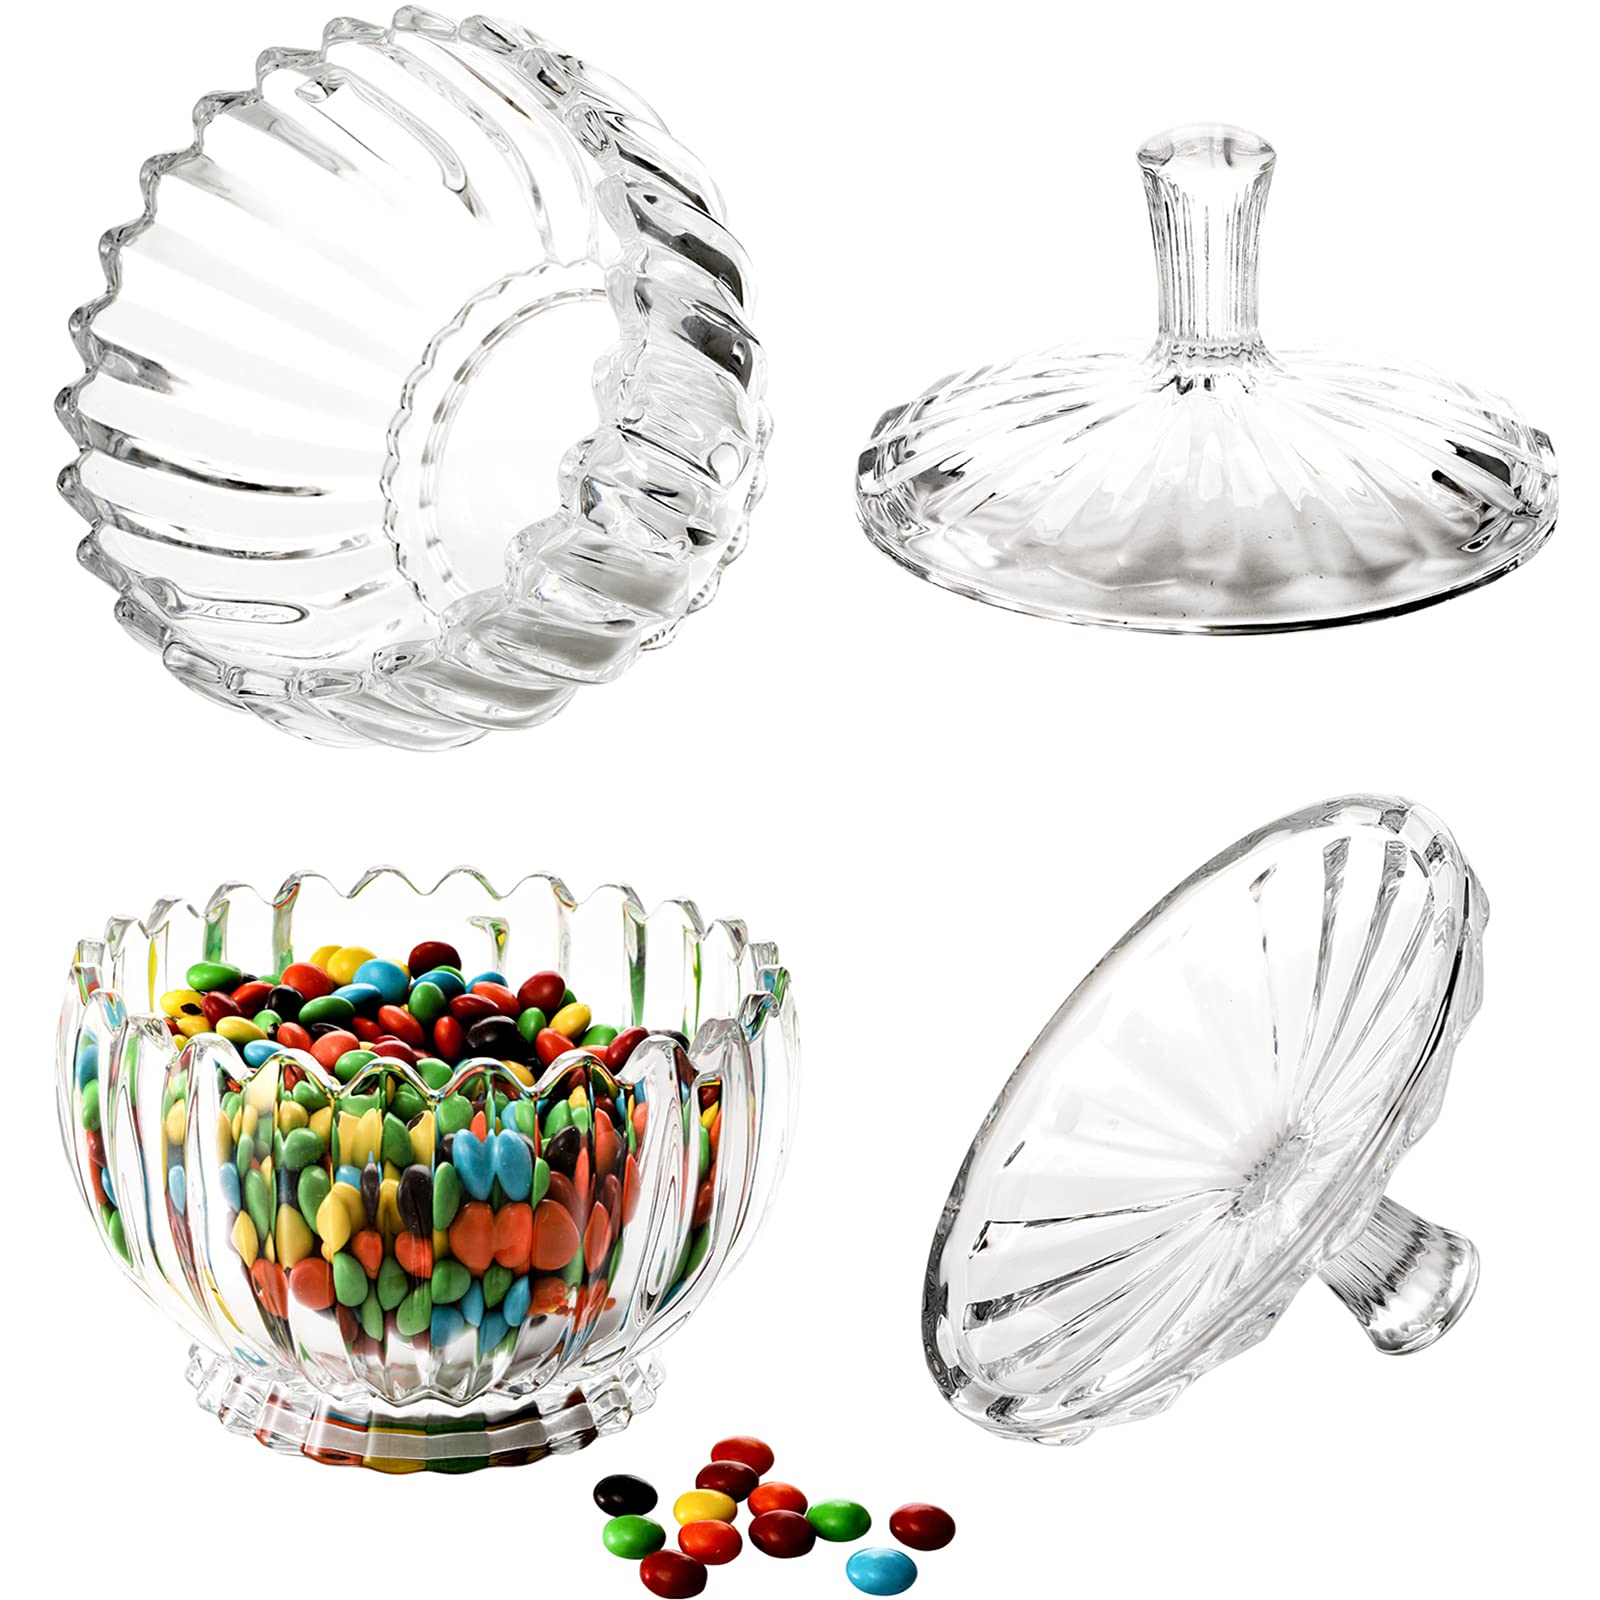 DEAYOU 2 Pack Glass Candy Dish with Lid Large, 34 Oz Crystal Decorative Covered Sugar Bowl, Clear Biscuit Barrel Candy Buffet Box Storage Container for Snack, Gift, 6", Vintage Stripe Style